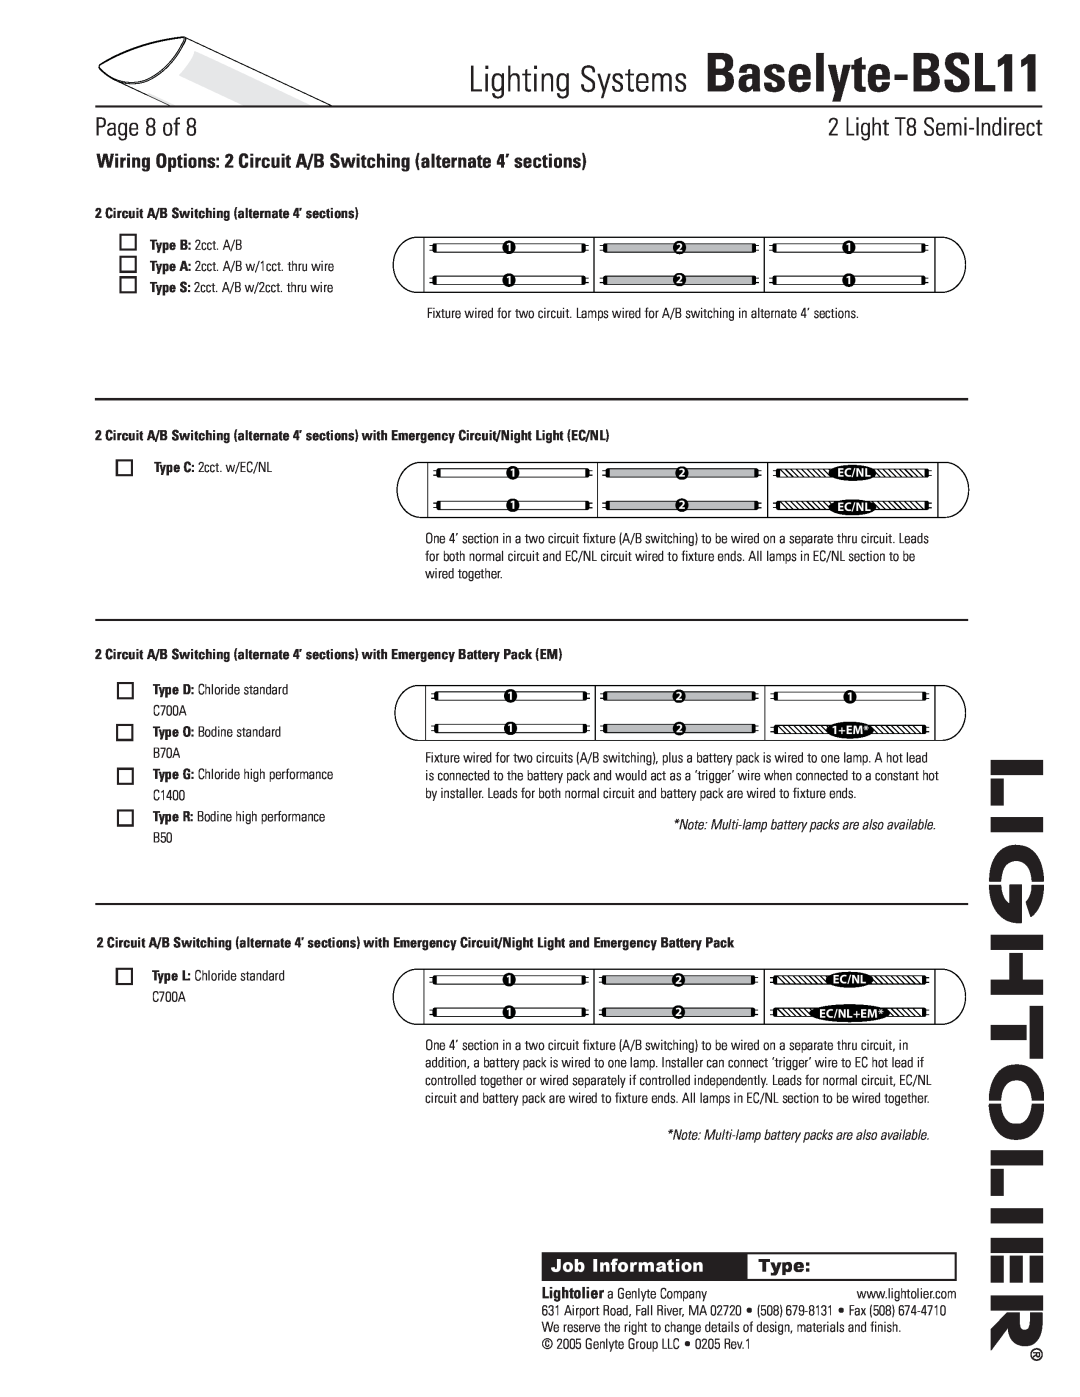 Lightolier Baselyte-BSL11 specifications Circuit A/B Switching alternate 4’ sections, Type O Bodine standard B70A, Page of 